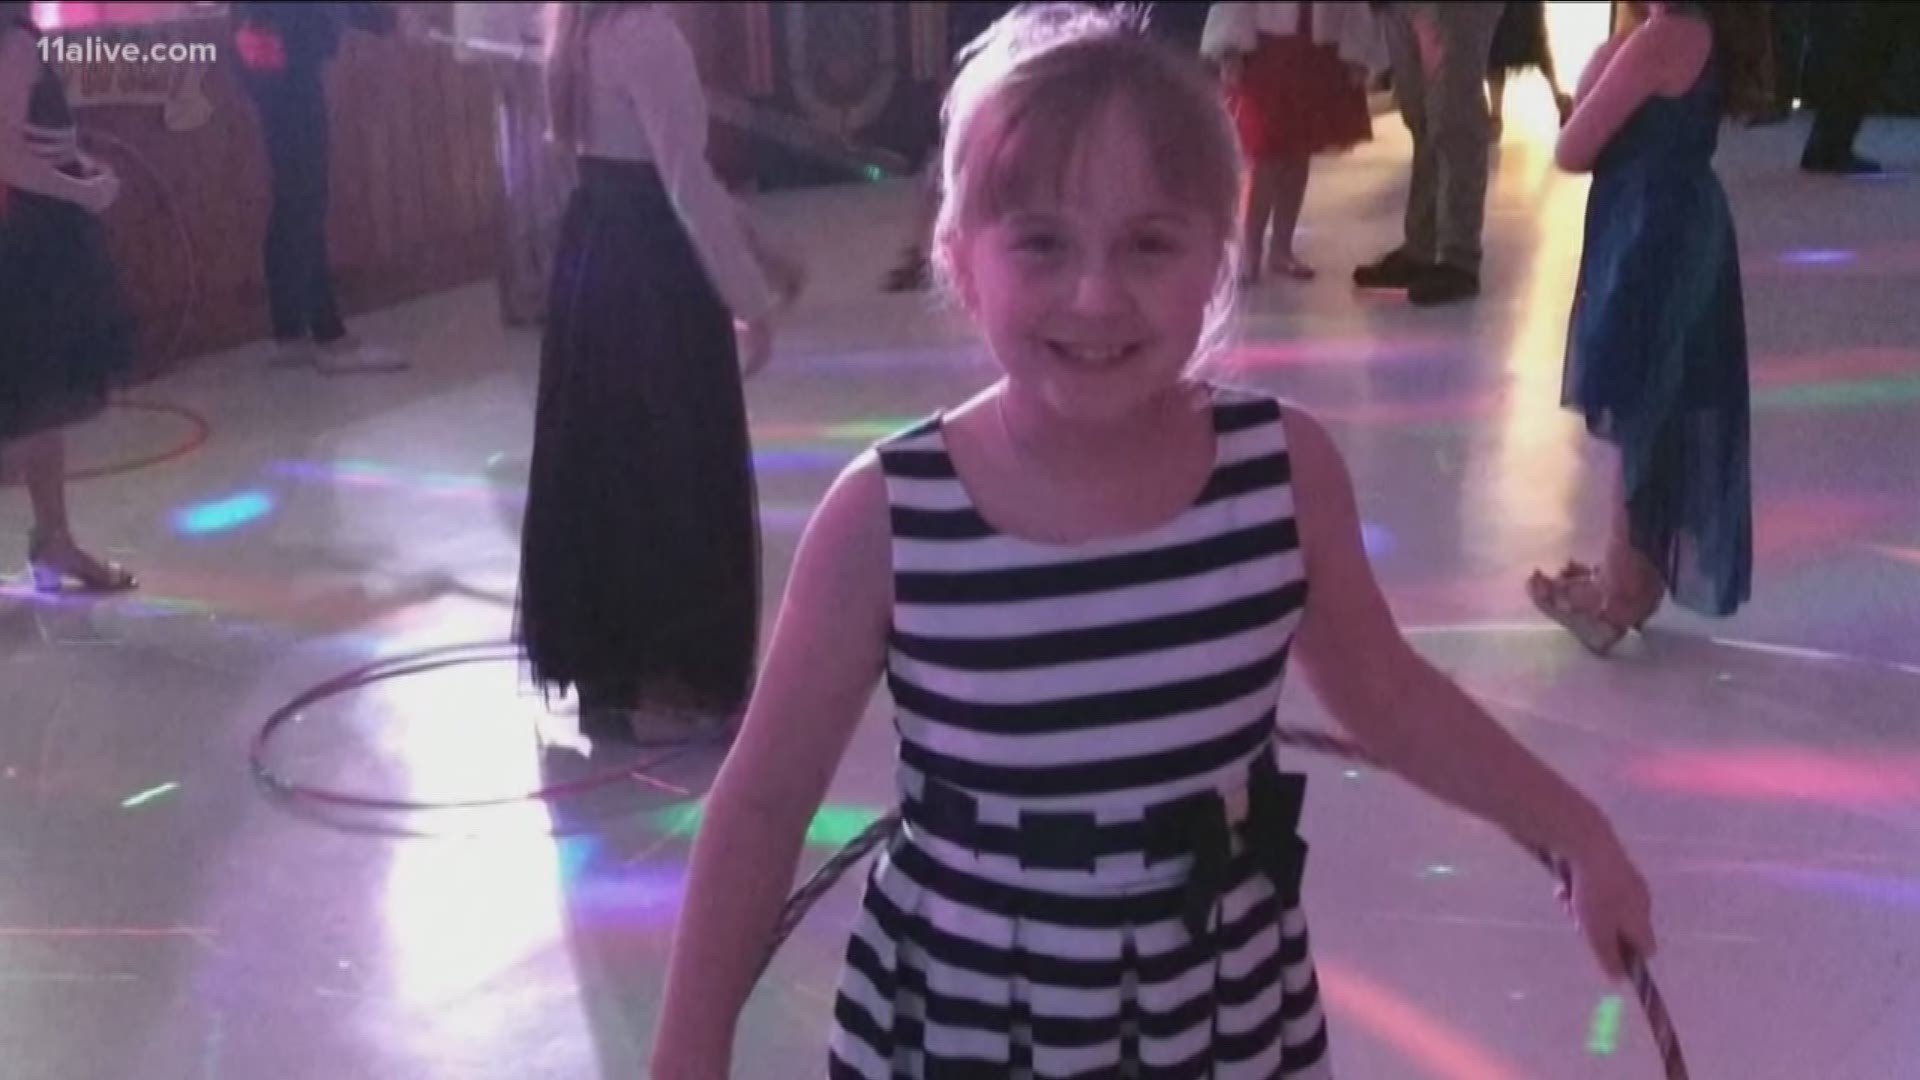 A GoFundMe page has been set up to help with funeral costs for the family of Taylor Thornton.